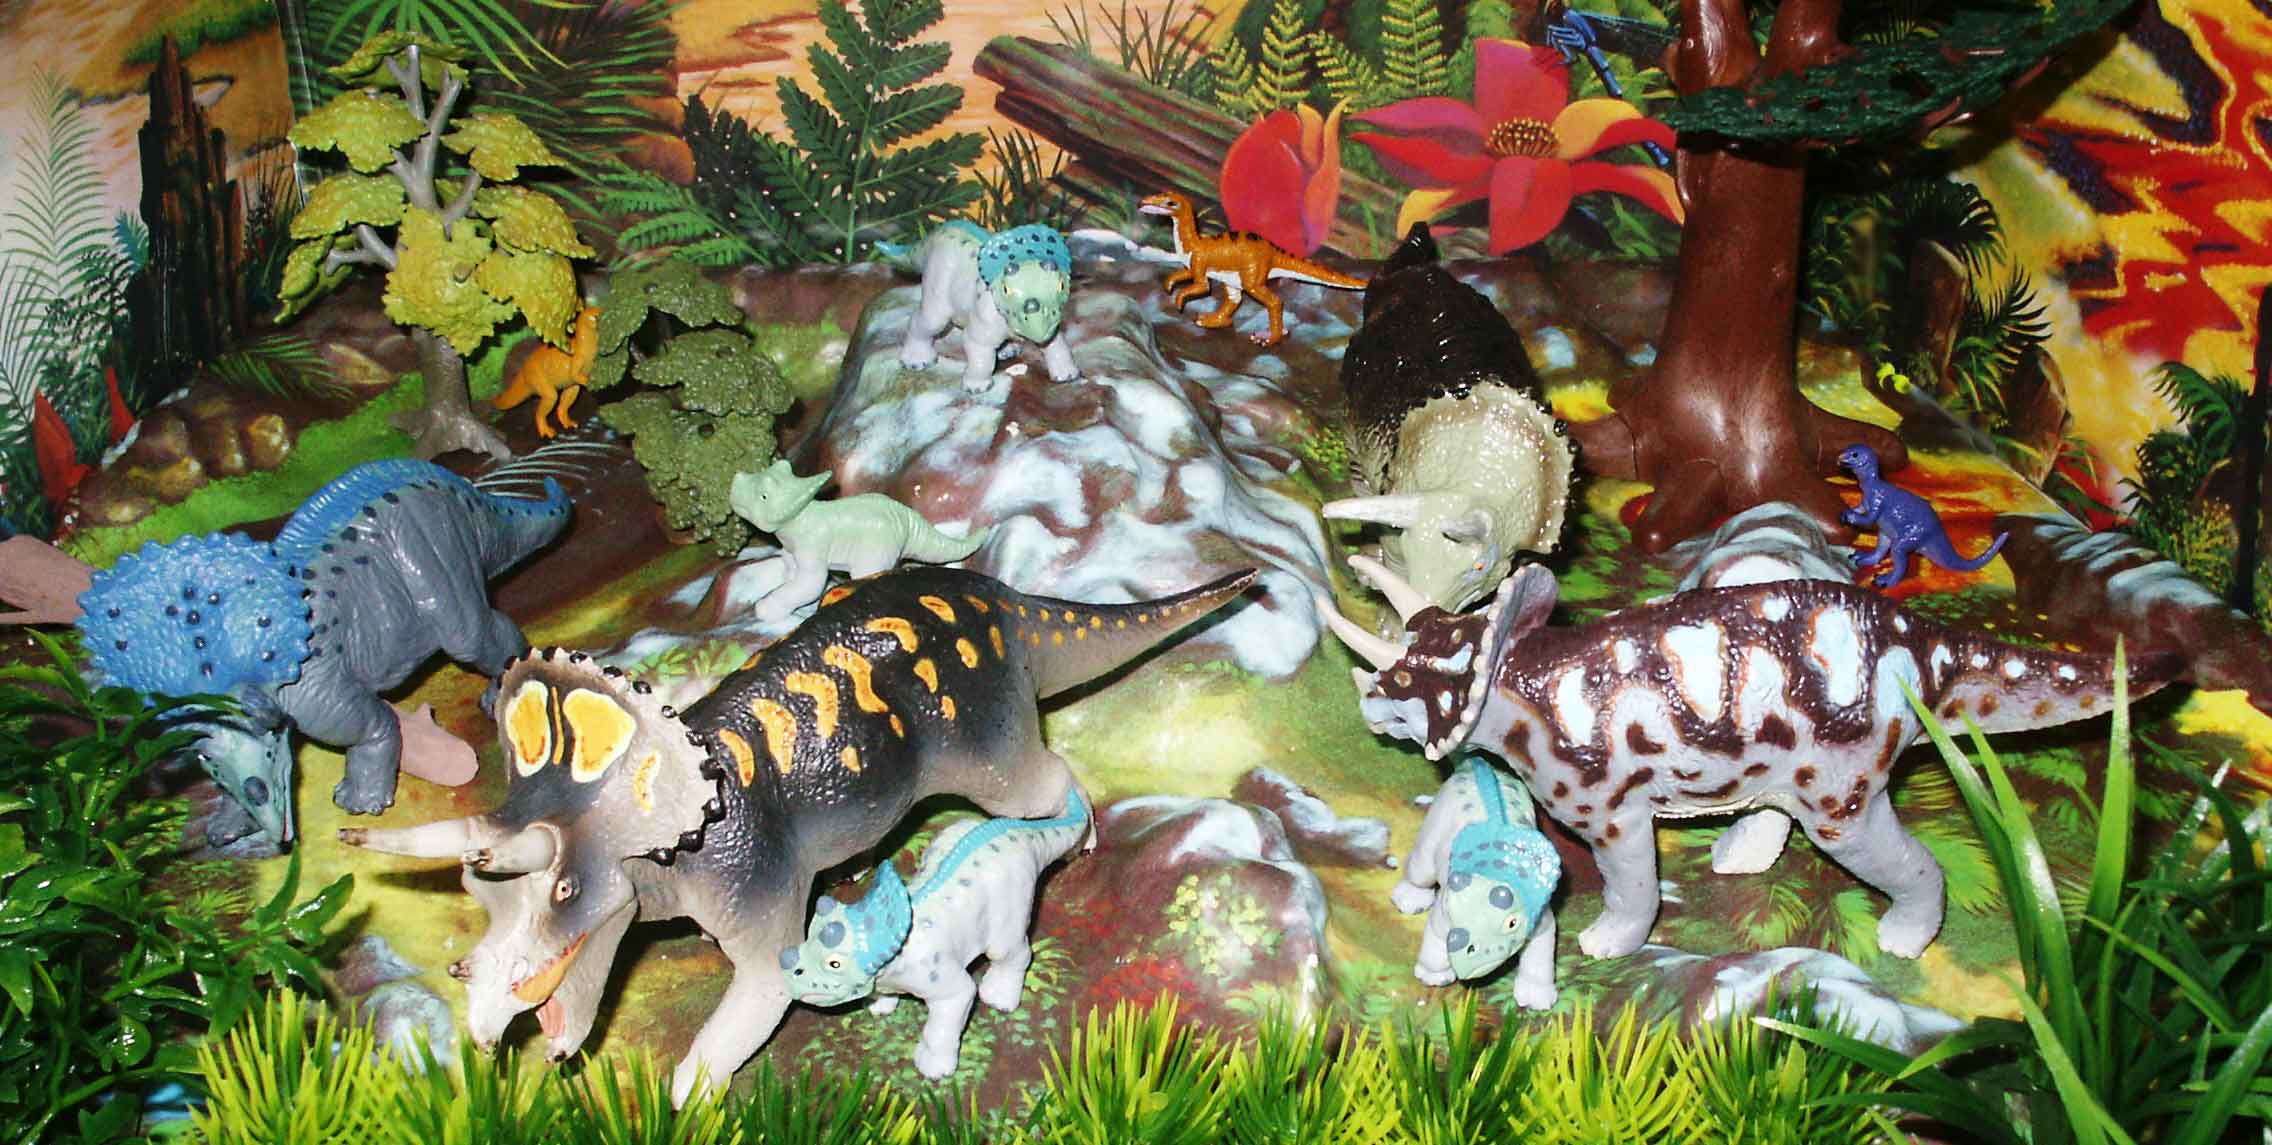 Safari ltd. has the widest ranges of Triceratops figures. The Carnegie lines has two versions of the original and new release. There is a Wild Safari adult and a Wild Things calf. There is also a baby dinosaur toob Triceratops. The Troodon and Thescelosaurus are bin figures with custom paint